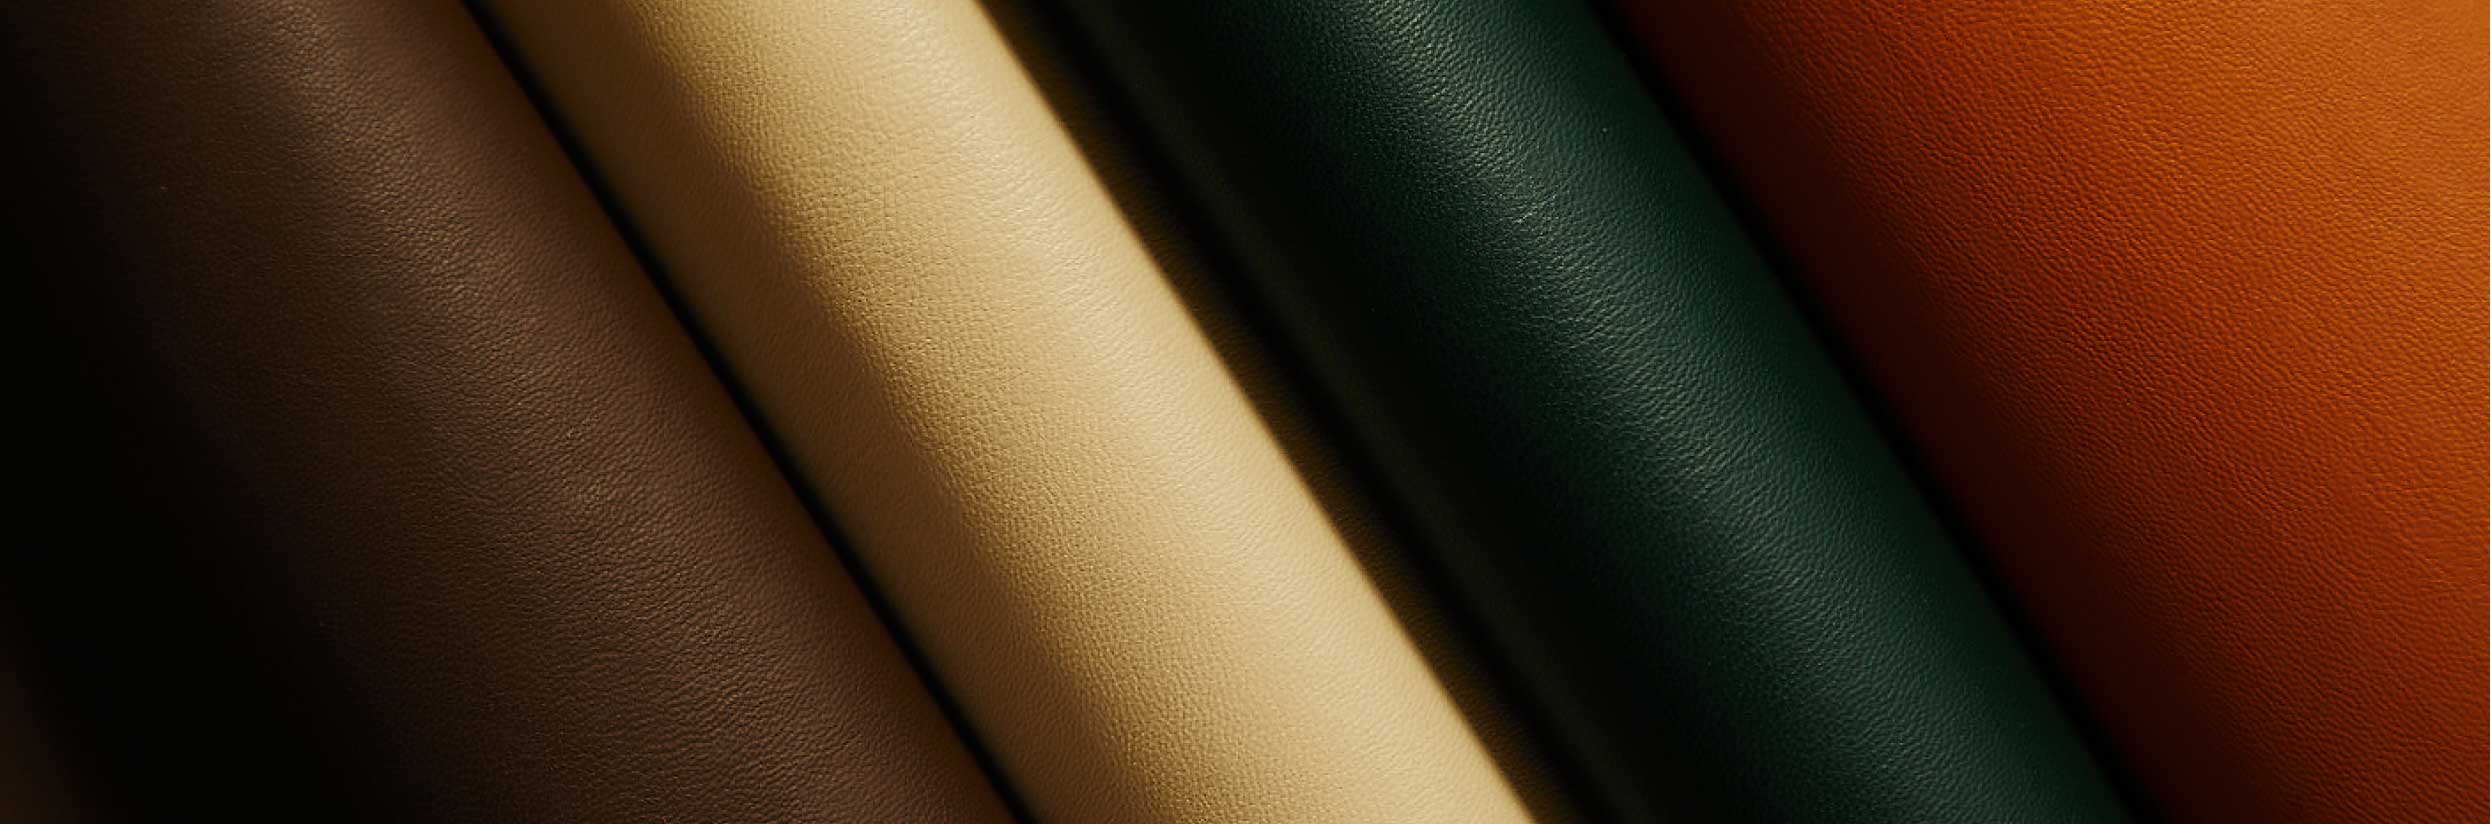 Background: Swatches of Banbū Leather in various colors